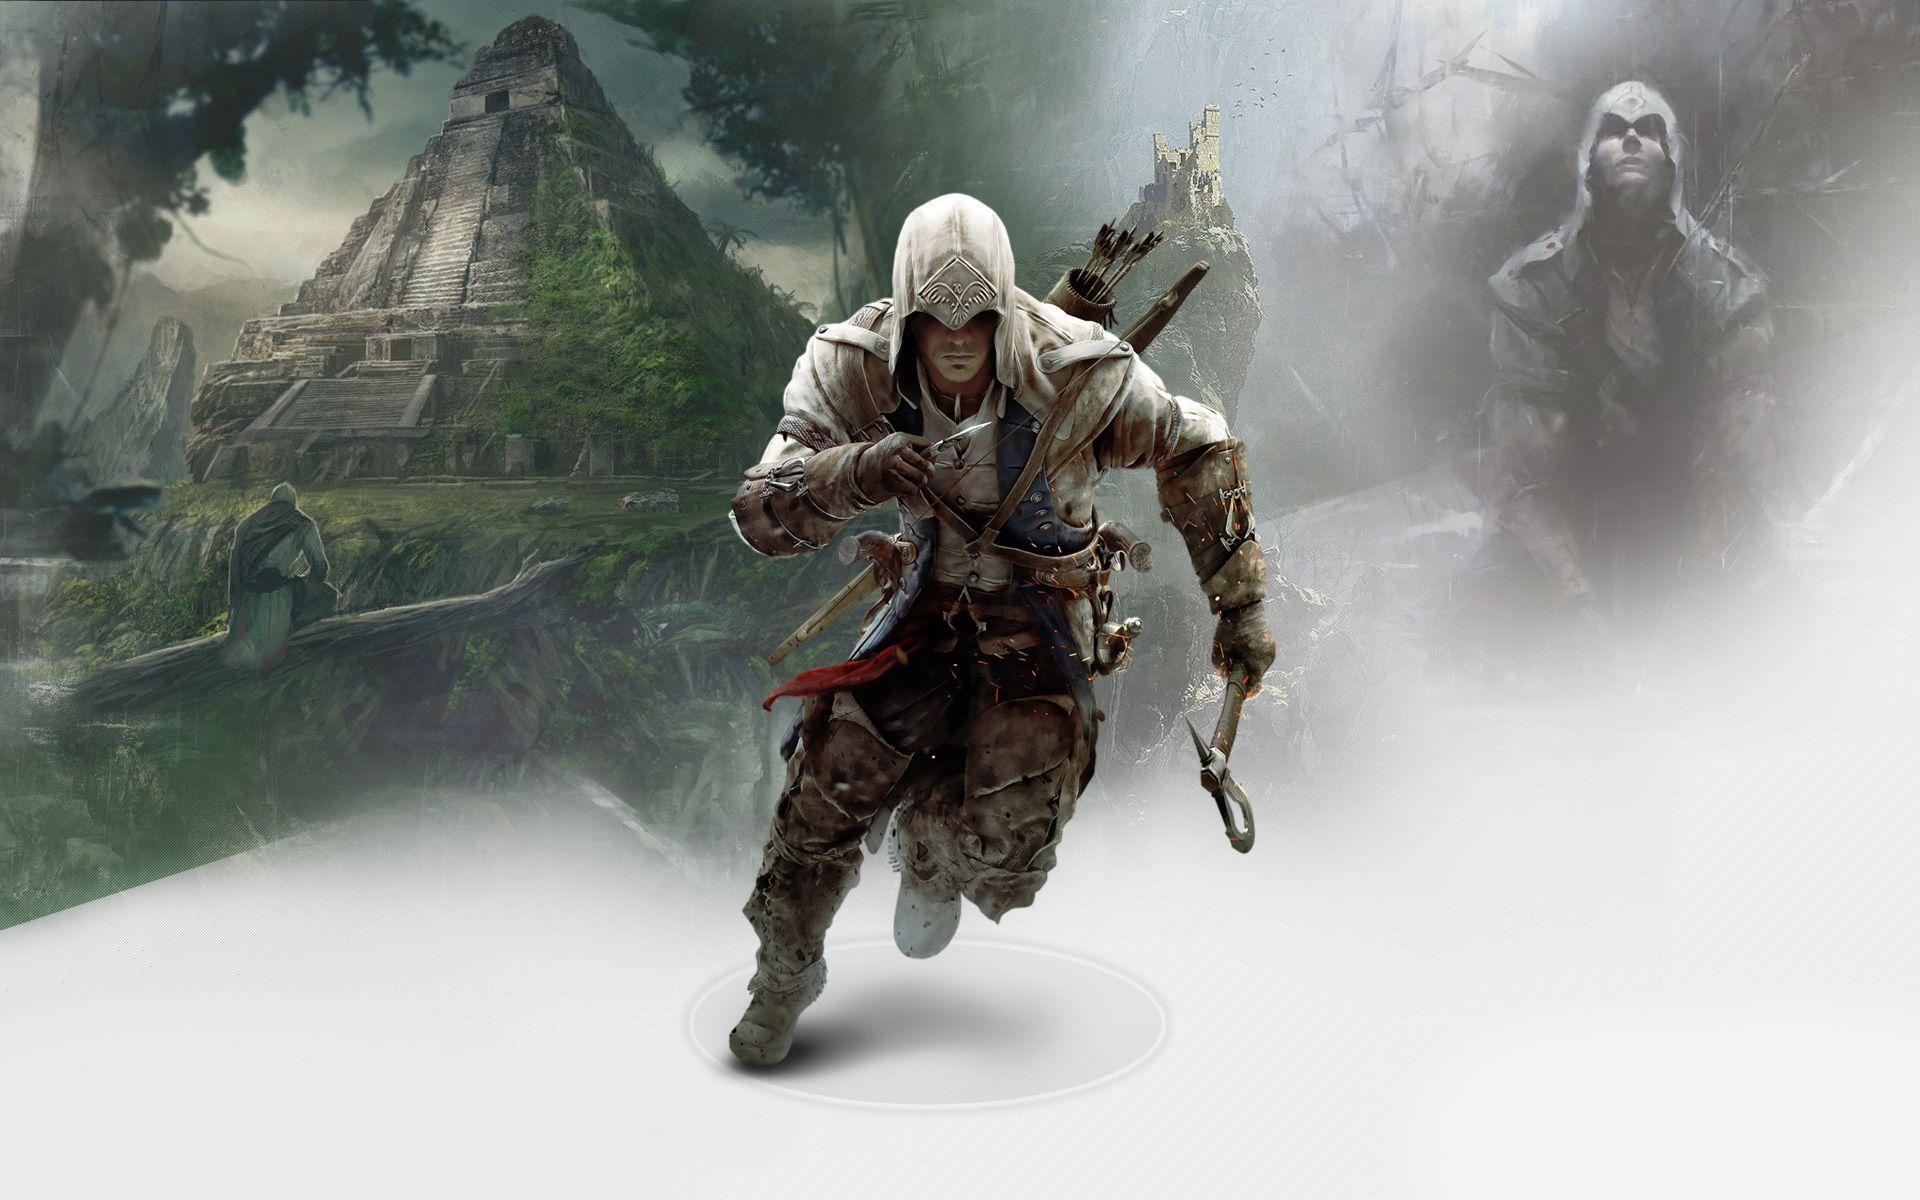 Connor in Assassin's Creed 3 Wallpaper